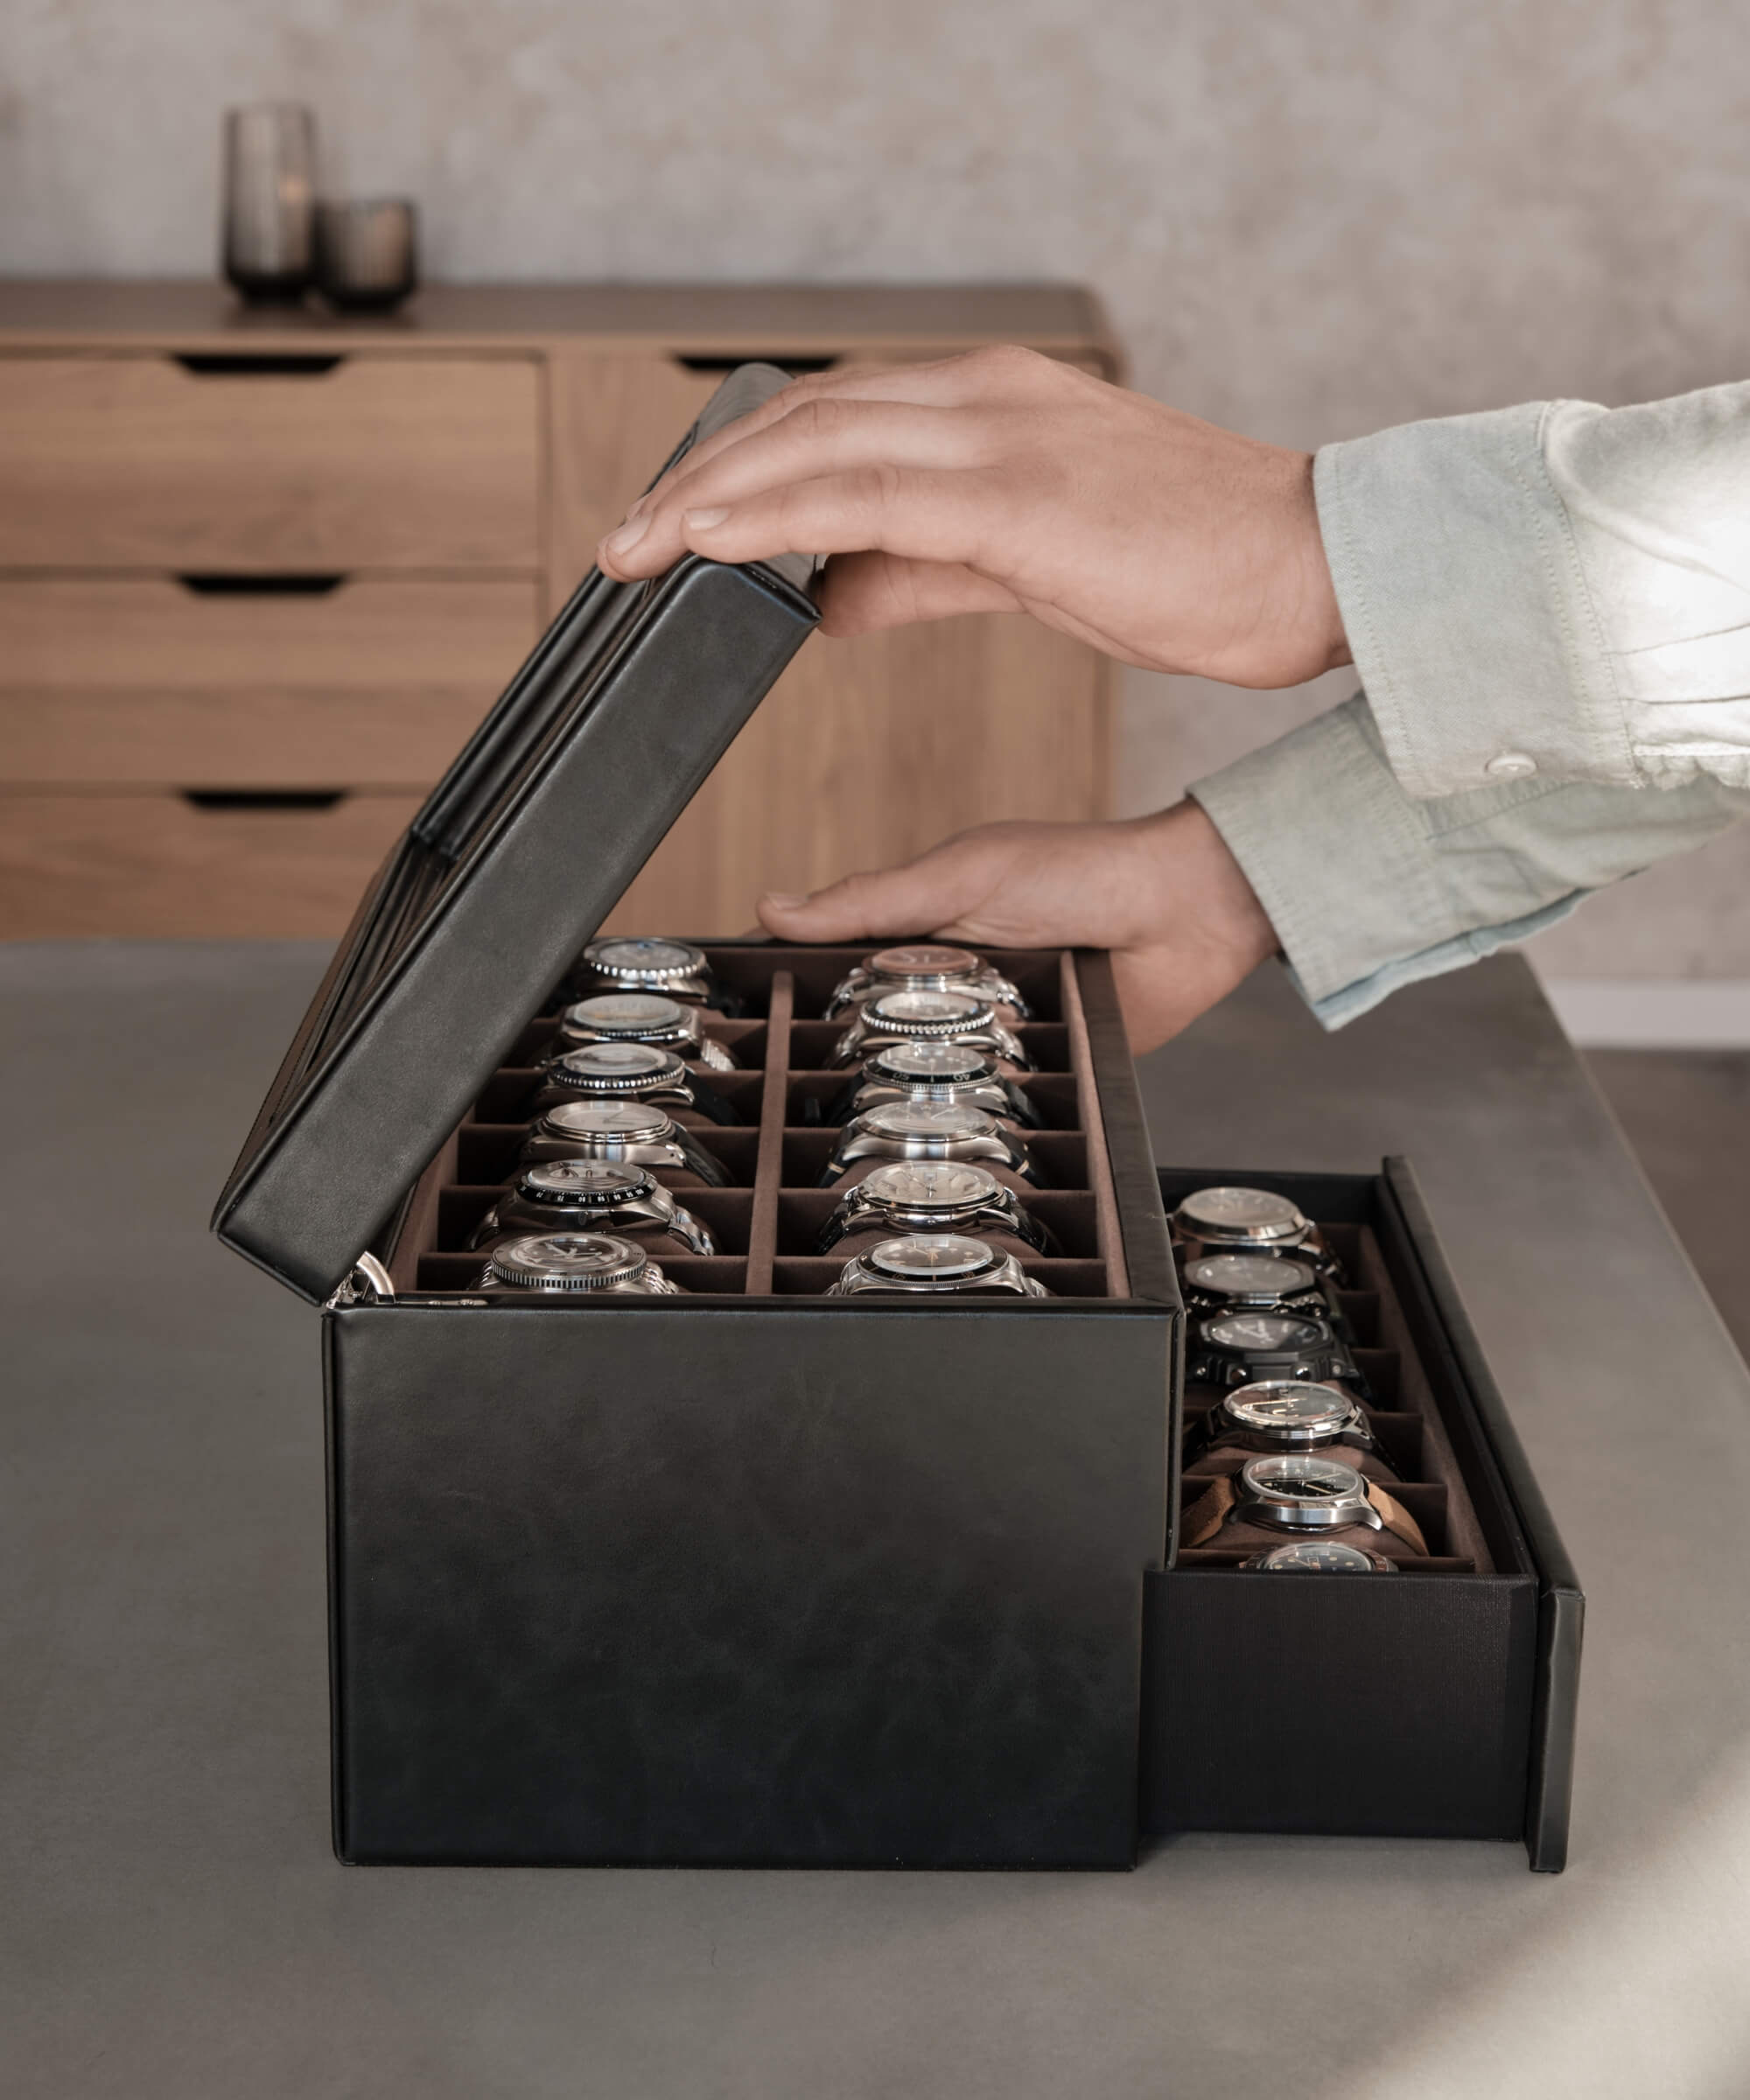 A person is opening a TAWBURY Bayswater 24 Slot Watch Box with Drawer - Black to organize their timepieces on a table.